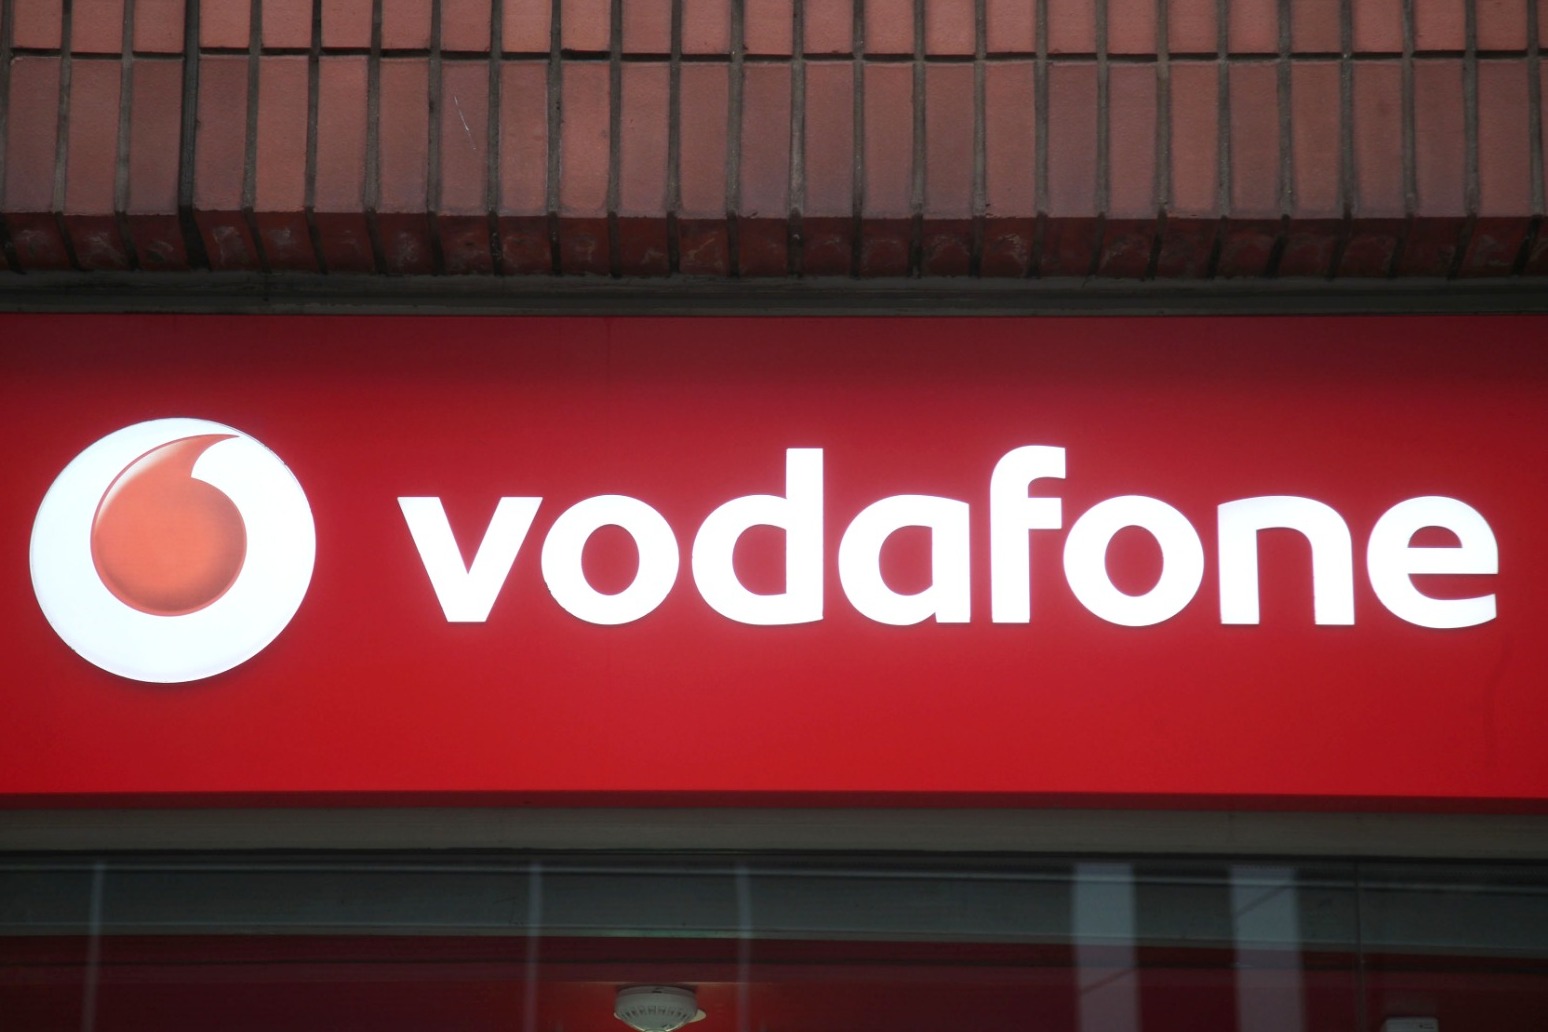 Vodafone to offer free mobile connectivity to 200,000 Ukrainian refugees 